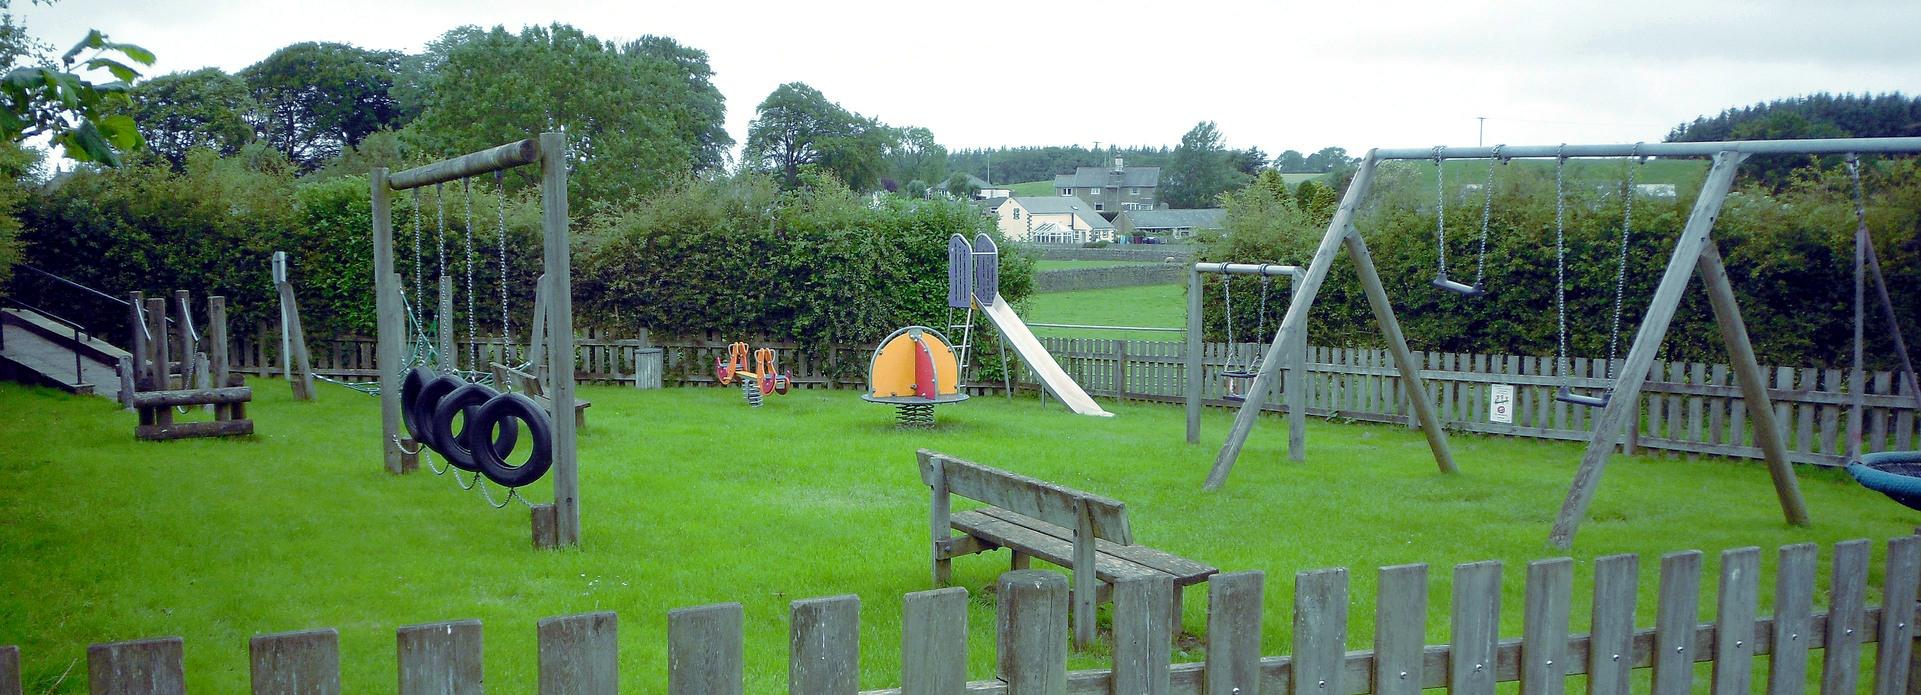 A view of the children's play area on Crossgates road